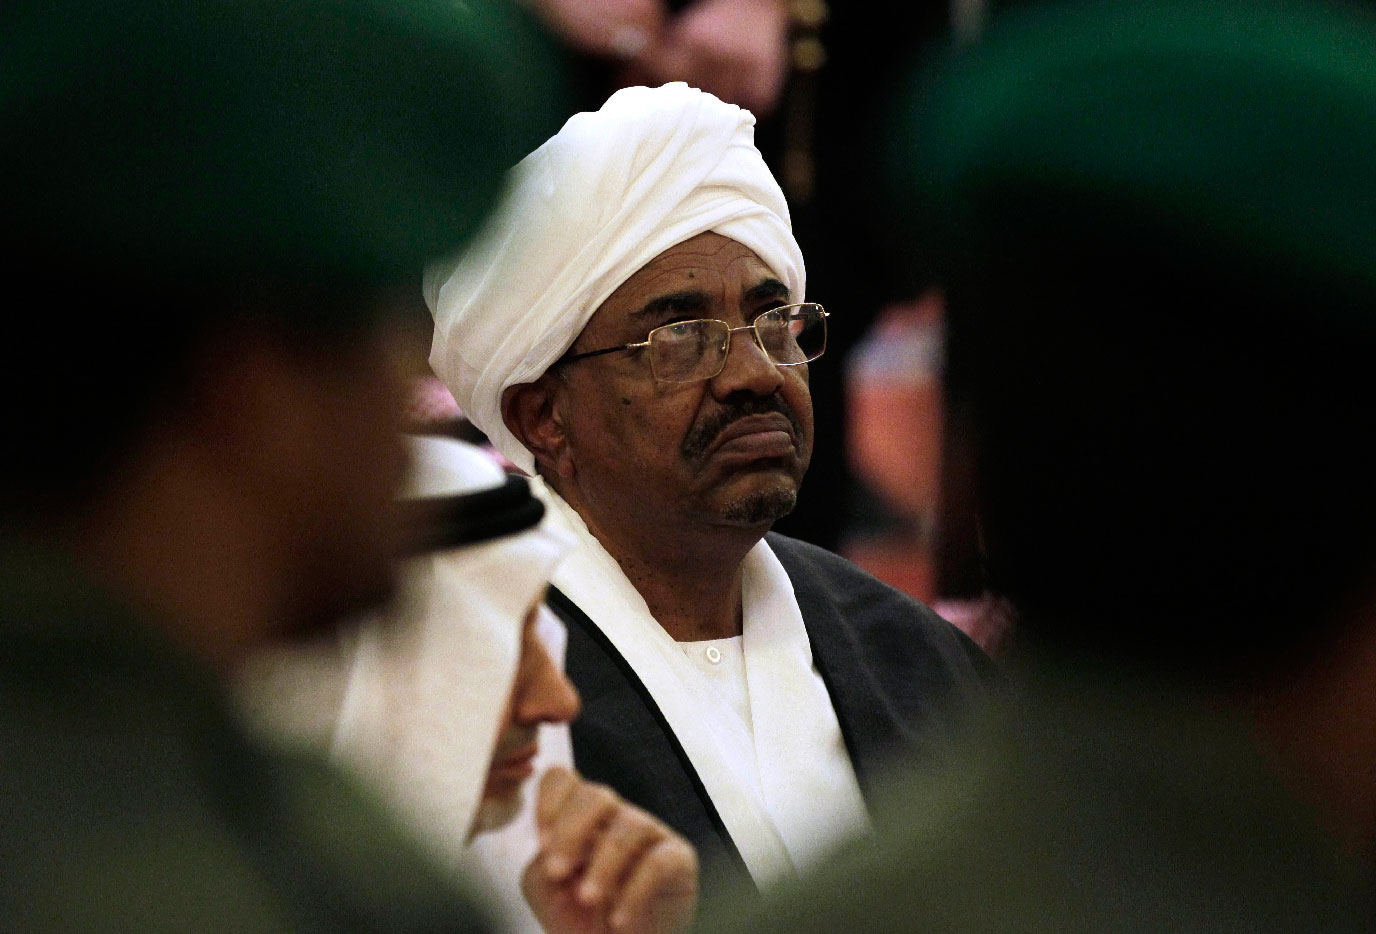 Bashir swept to power in Sudan in an Islamist-backed coup in 1989